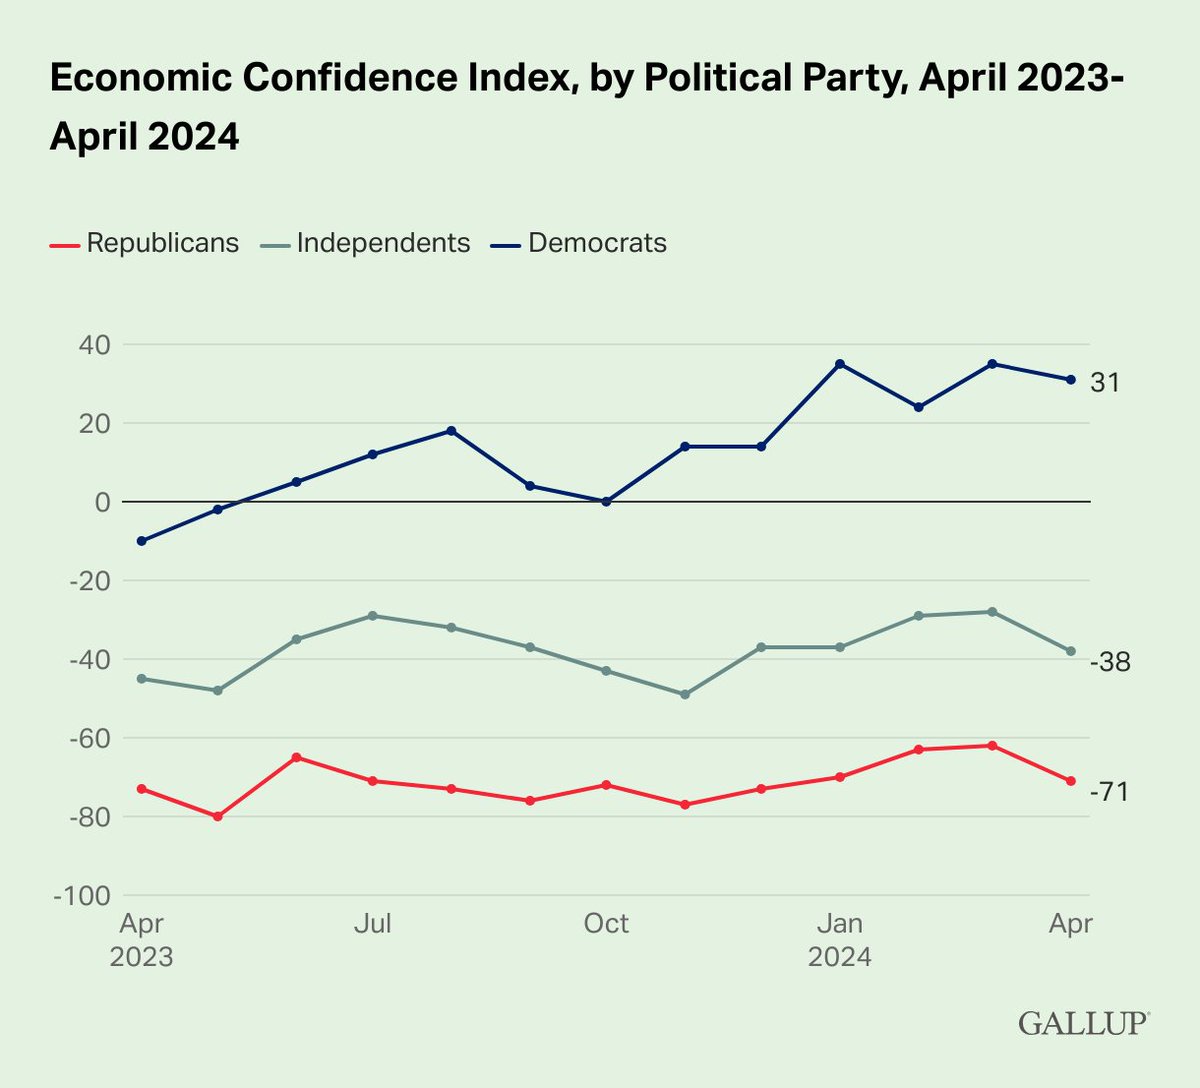 Democrats have been the most economically optimistic of the three-party groups since Biden took office; their current ECI score dipped to 31 in April from 35 in March.